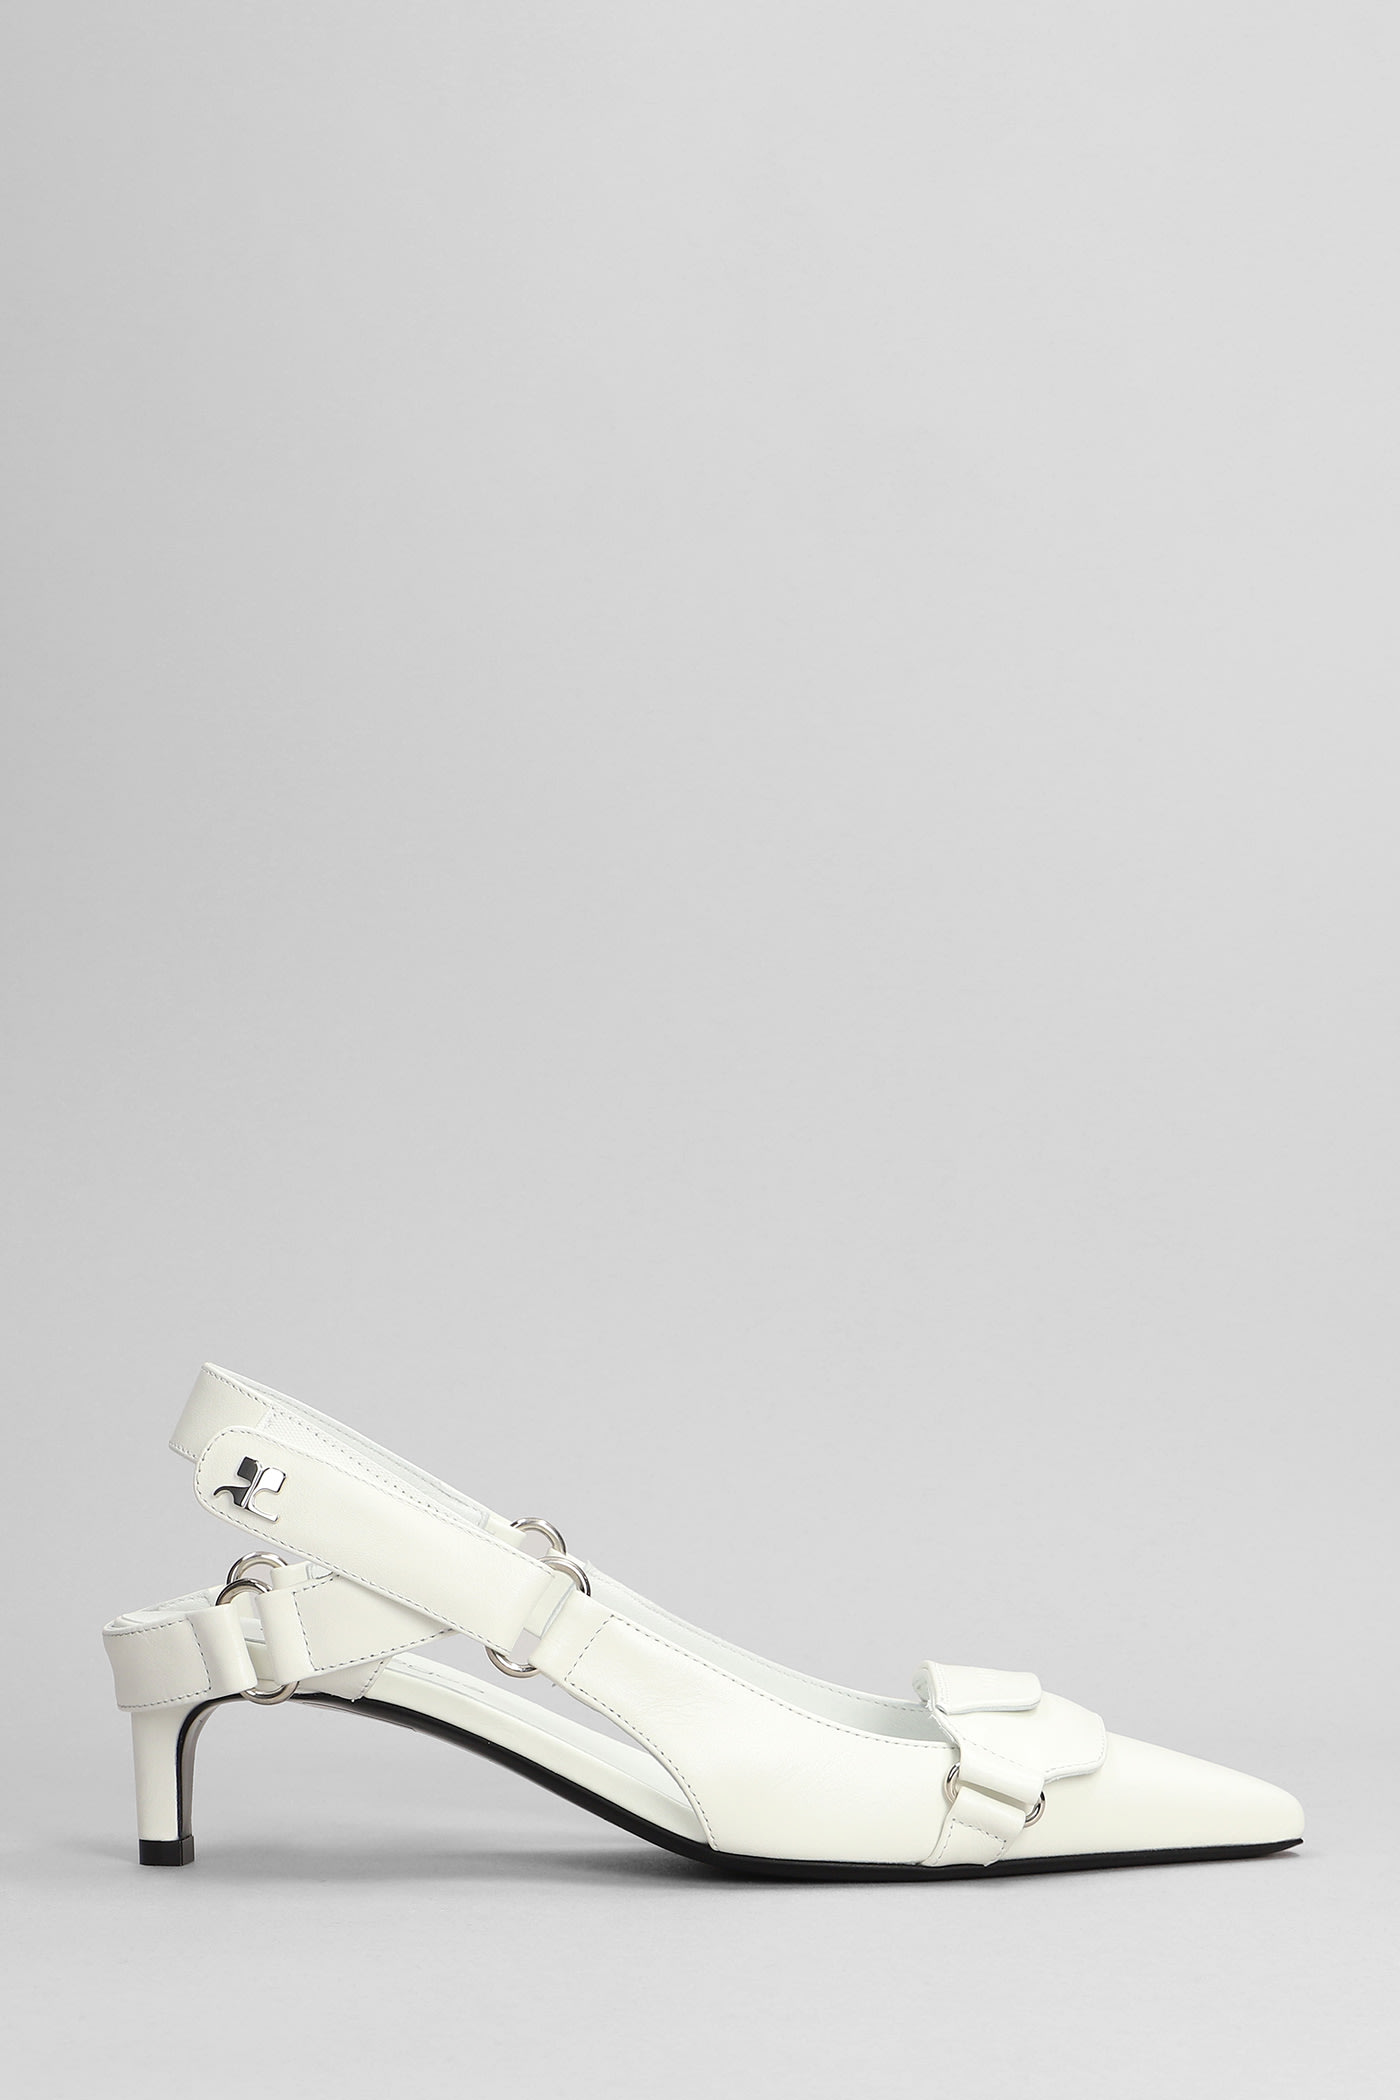 COURRÈGES RACER LEATHER PUMPS IN WHITE LEATHER